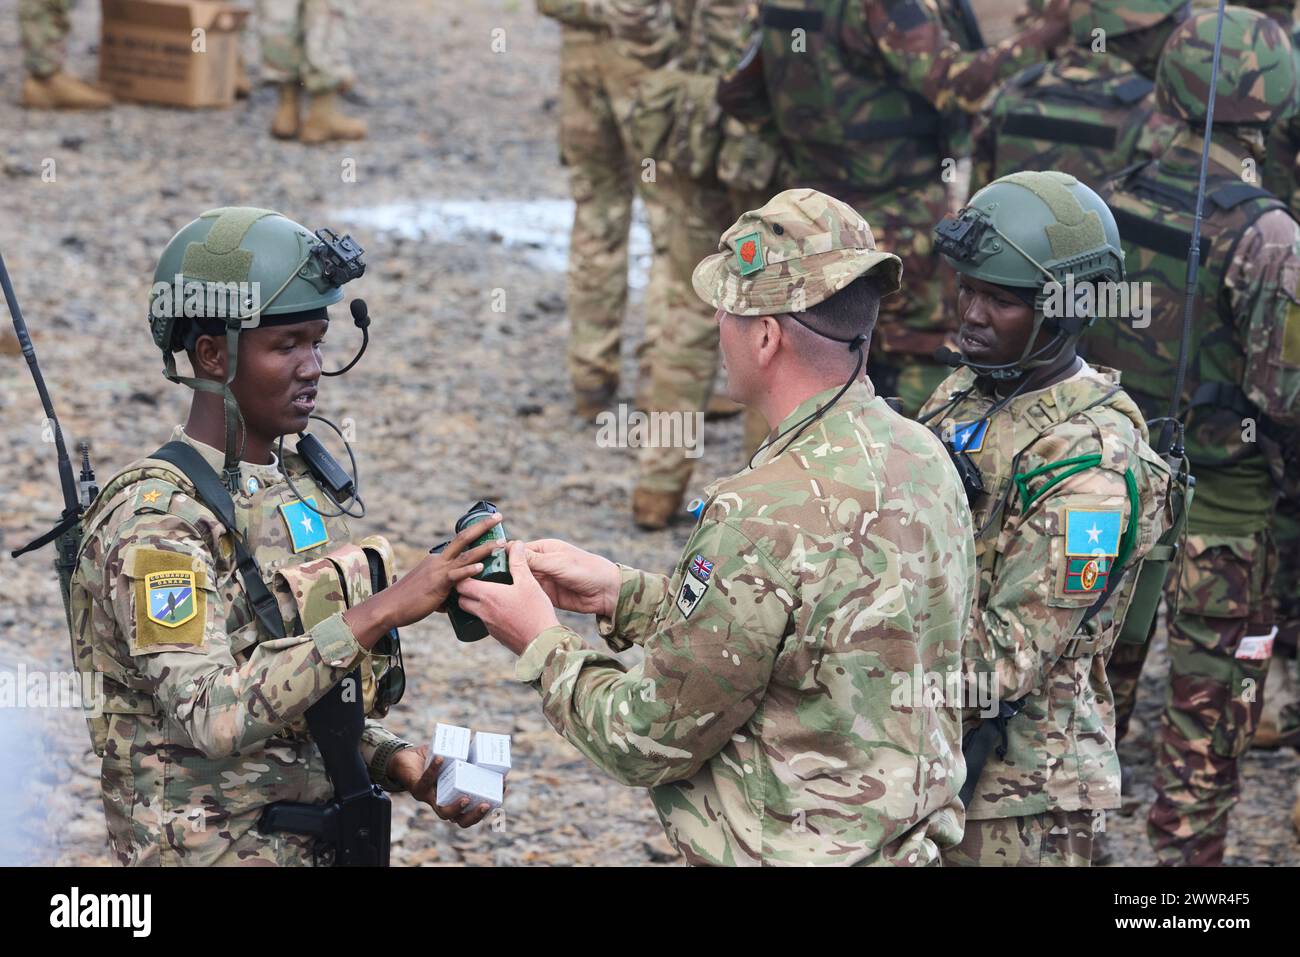 A Somali Danab soldier receives practice munitions from a British Army soldier from the 1st Battalion Irish Guards, 11th Security Forces Brigade during Justified Accord 2024 (JA24) in Nanyuki, Kenya, Feb. 28, 2024. JA24 is U.S. Africa Command's largest exercise in East Africa, running from Feb. 26 - March 7. Led by U.S. Army Southern European Task Force, Africa (SETAF-AF), and hosted in Kenya, this year's exercise will incorporate personnel and units from 23 nations. This multinational exercise builds readiness for the U.S. joint force, prepares regional partners for UN and AU mandated mission Stock Photo